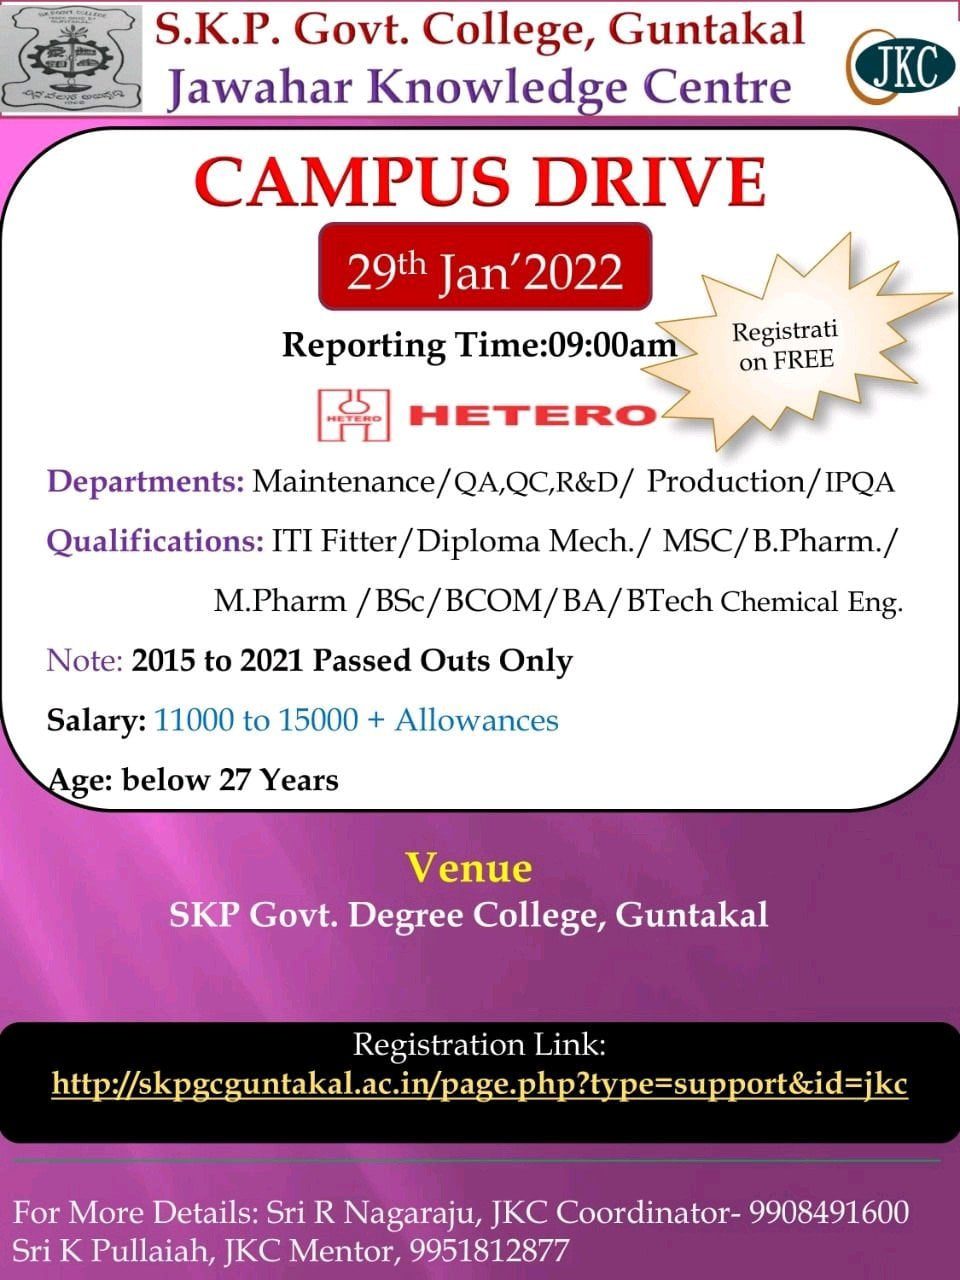 Hetero Freshers Campus Drive for MSC / B Pharmacy / M Pharm / BSc / BCOM / BA / BTech Chemical Eng / ITI Fitter/ Diploma Mech  Candidates